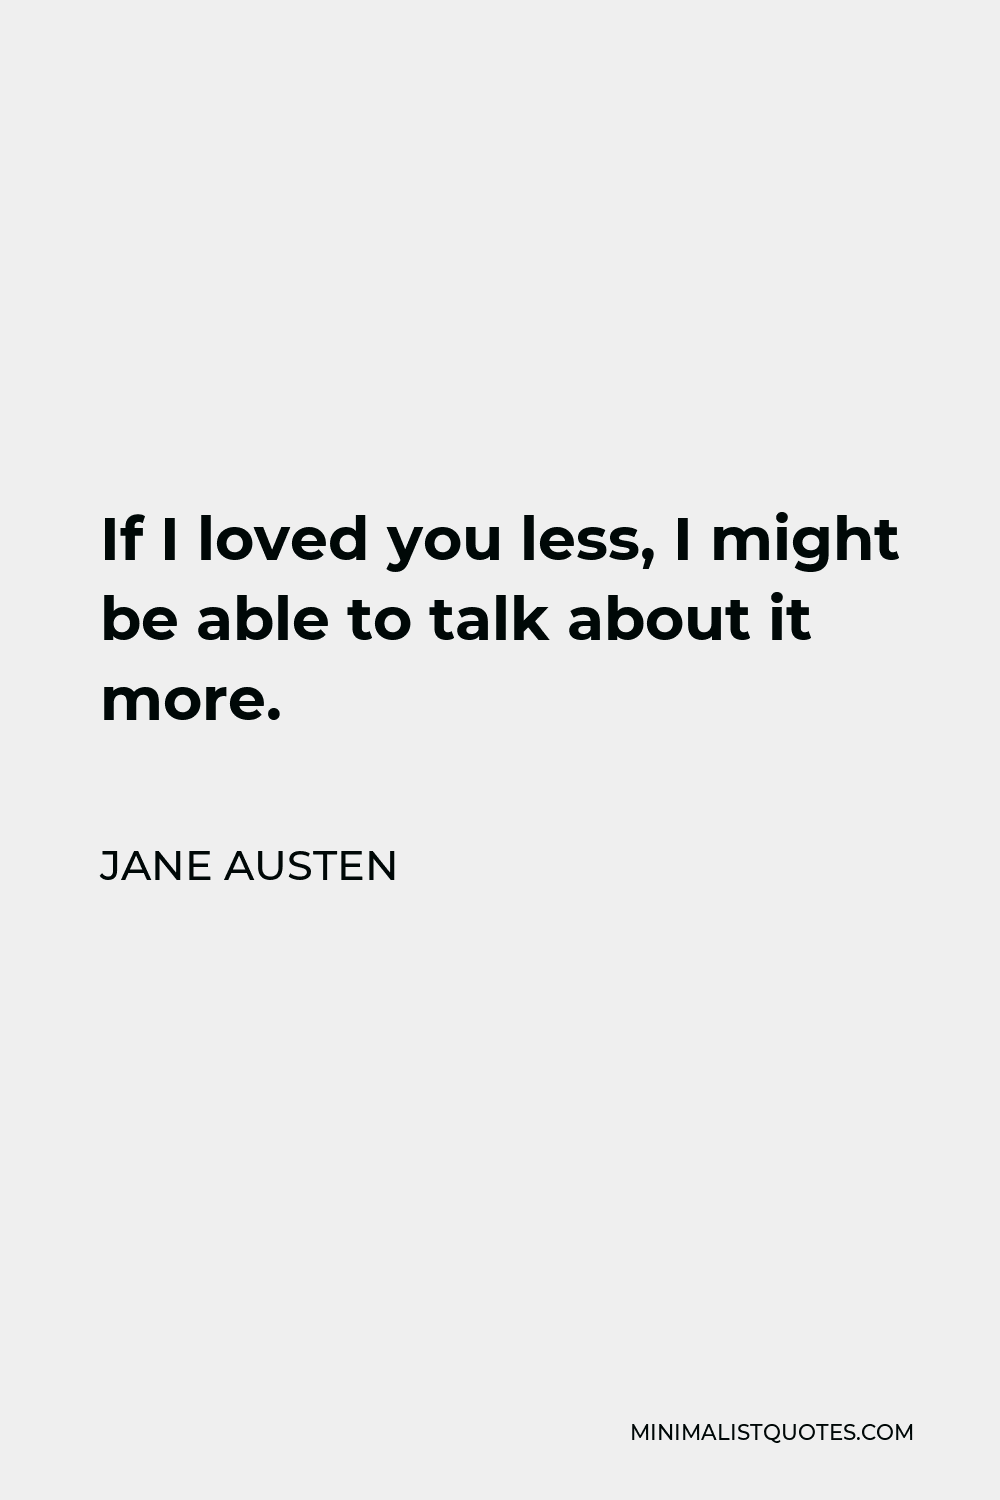 Jane Austen Quote - If I loved you less, I might be able to talk about it more.